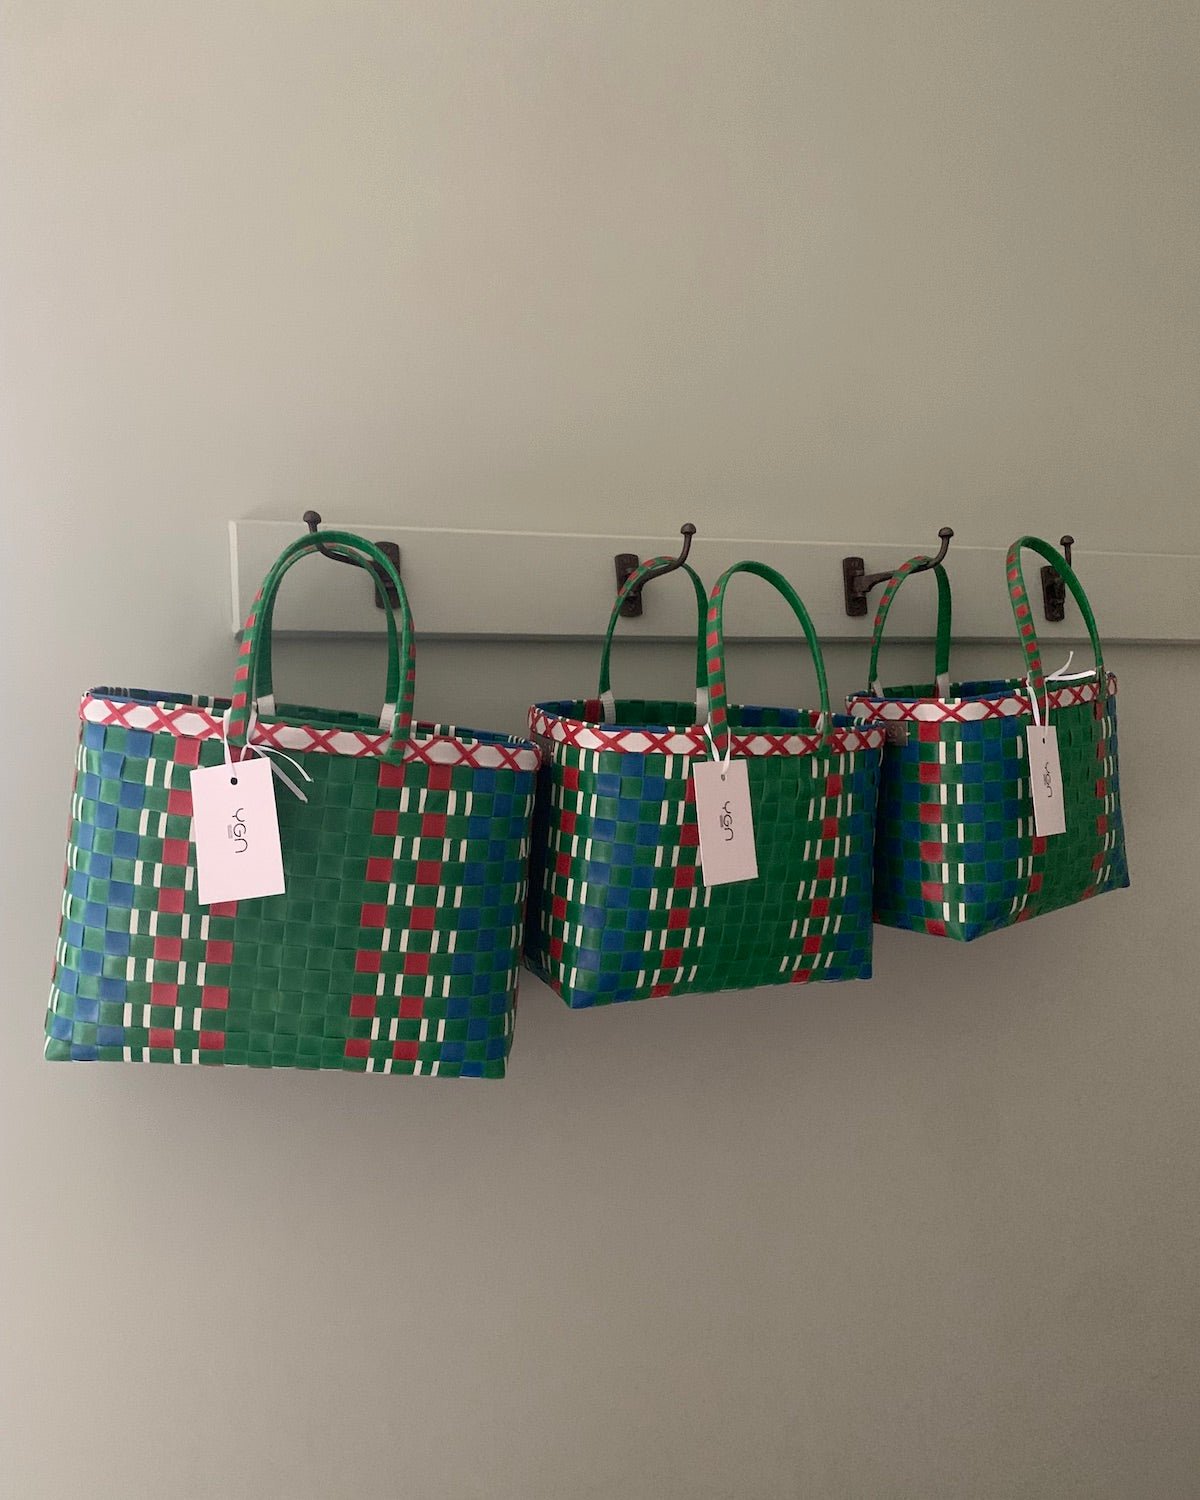 Limited Edition Basket in Green & Red Tones | Upcycled Handwoven Shopper Bag | Storage Basket - YGN Collective